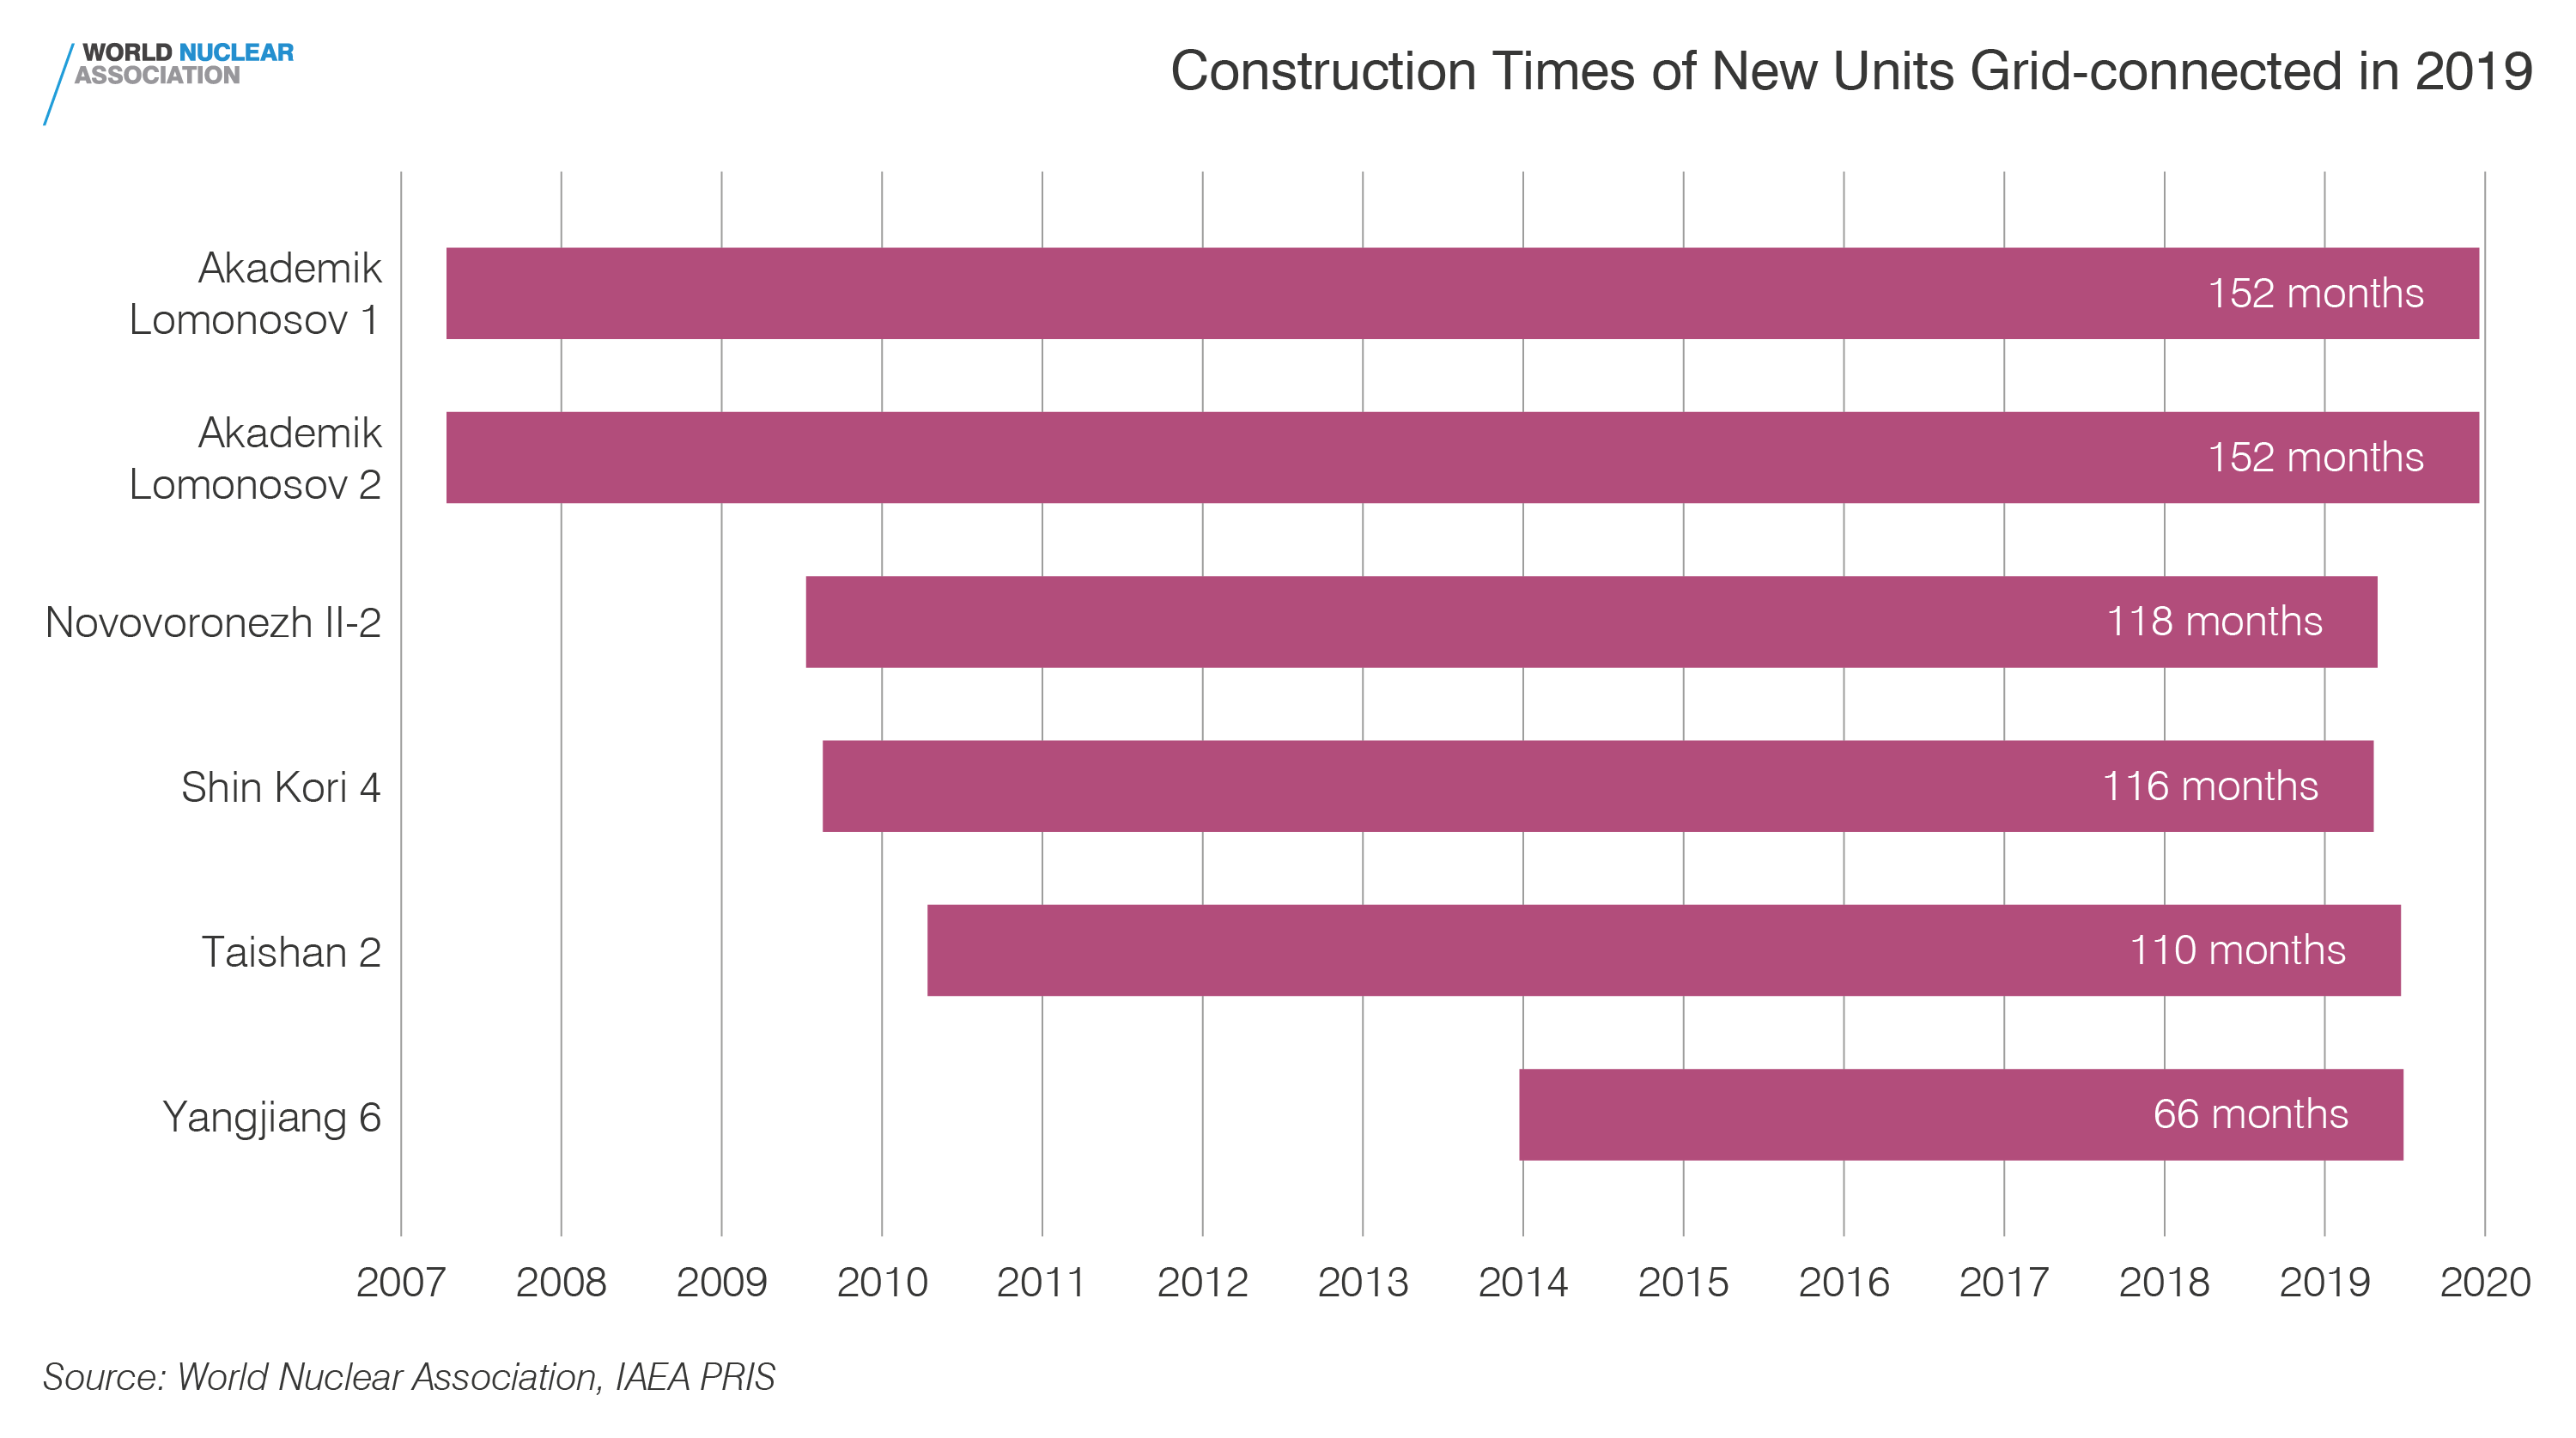 Construction times of new units connected to the grid in 2019